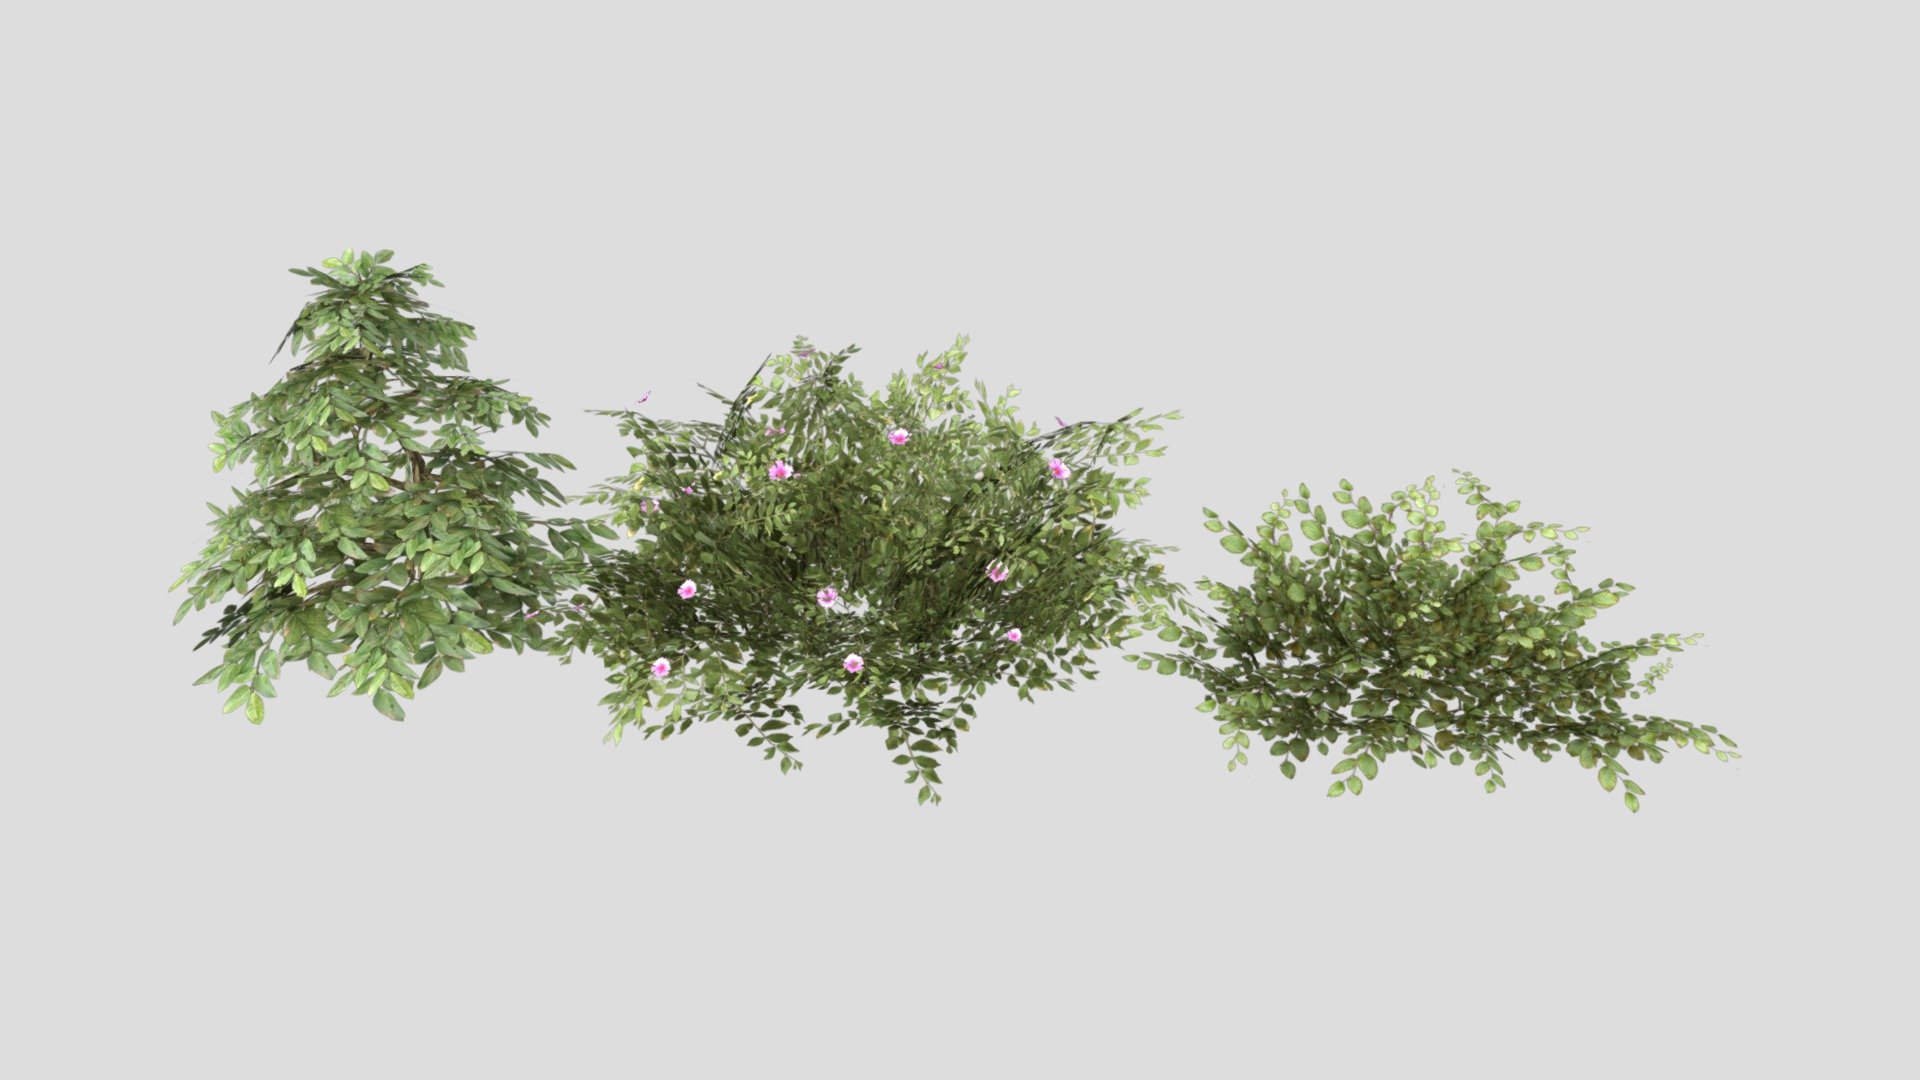 Shrubs
The model has an optimized low poly mesh with the greatest possible number of simplifications that do not affect photo-realism but can help to simplify it, thus lightening your scene and allowing for using this model in real-time 3d applications.

Real-world accurate model.  In this product, all objects are ERROR-FREE and All LEGAL Geometry. Subdivisions are not required for this product.

Perfect for Architectural, Product visualization, Game Engine, and VR (Virtual Reality) No Plugin Needed.

Format Type




3ds Max 2017 (standard shader)

FBX

OBJ

3DS

Texture




Shrubs_03_Texture (TIF Format)

Shrubs_01_Texture (TIF Format)

Shrubs_02_Texture (TIF Format)

You might need to re-assign textures map to model in your relevant software - Shrubs - Buy Royalty Free 3D model by luxe3dworld 3d model